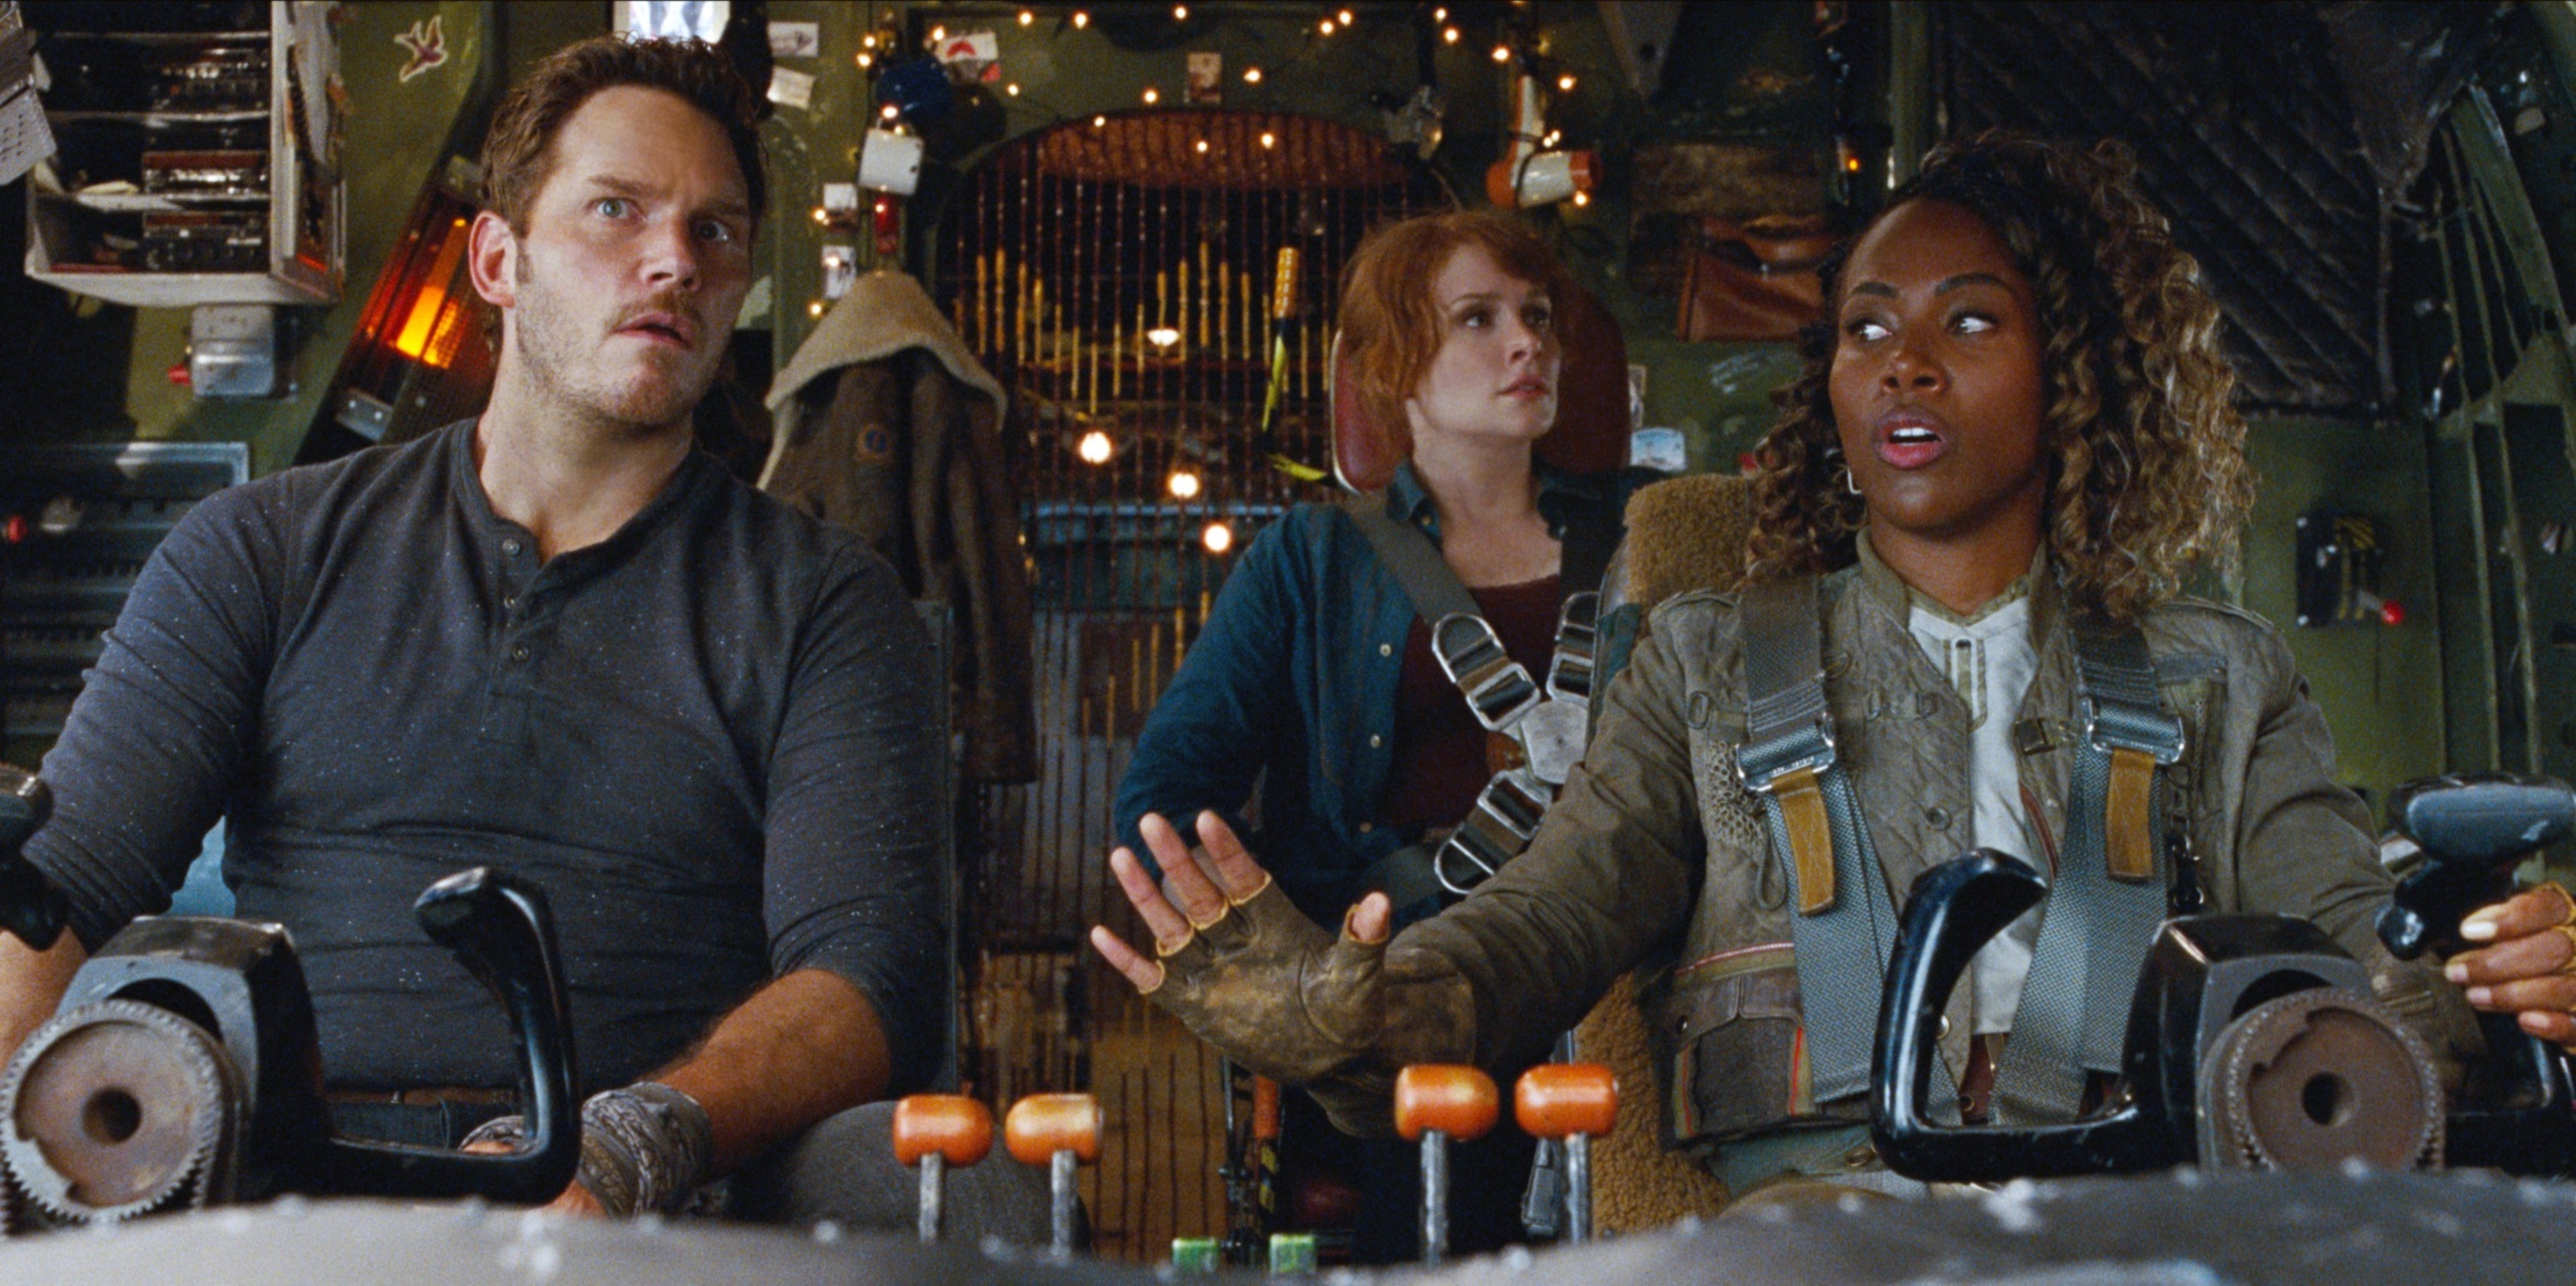 Scene from Jurassic World: Dominion with Bryce, Chris, and DeWanda Wise